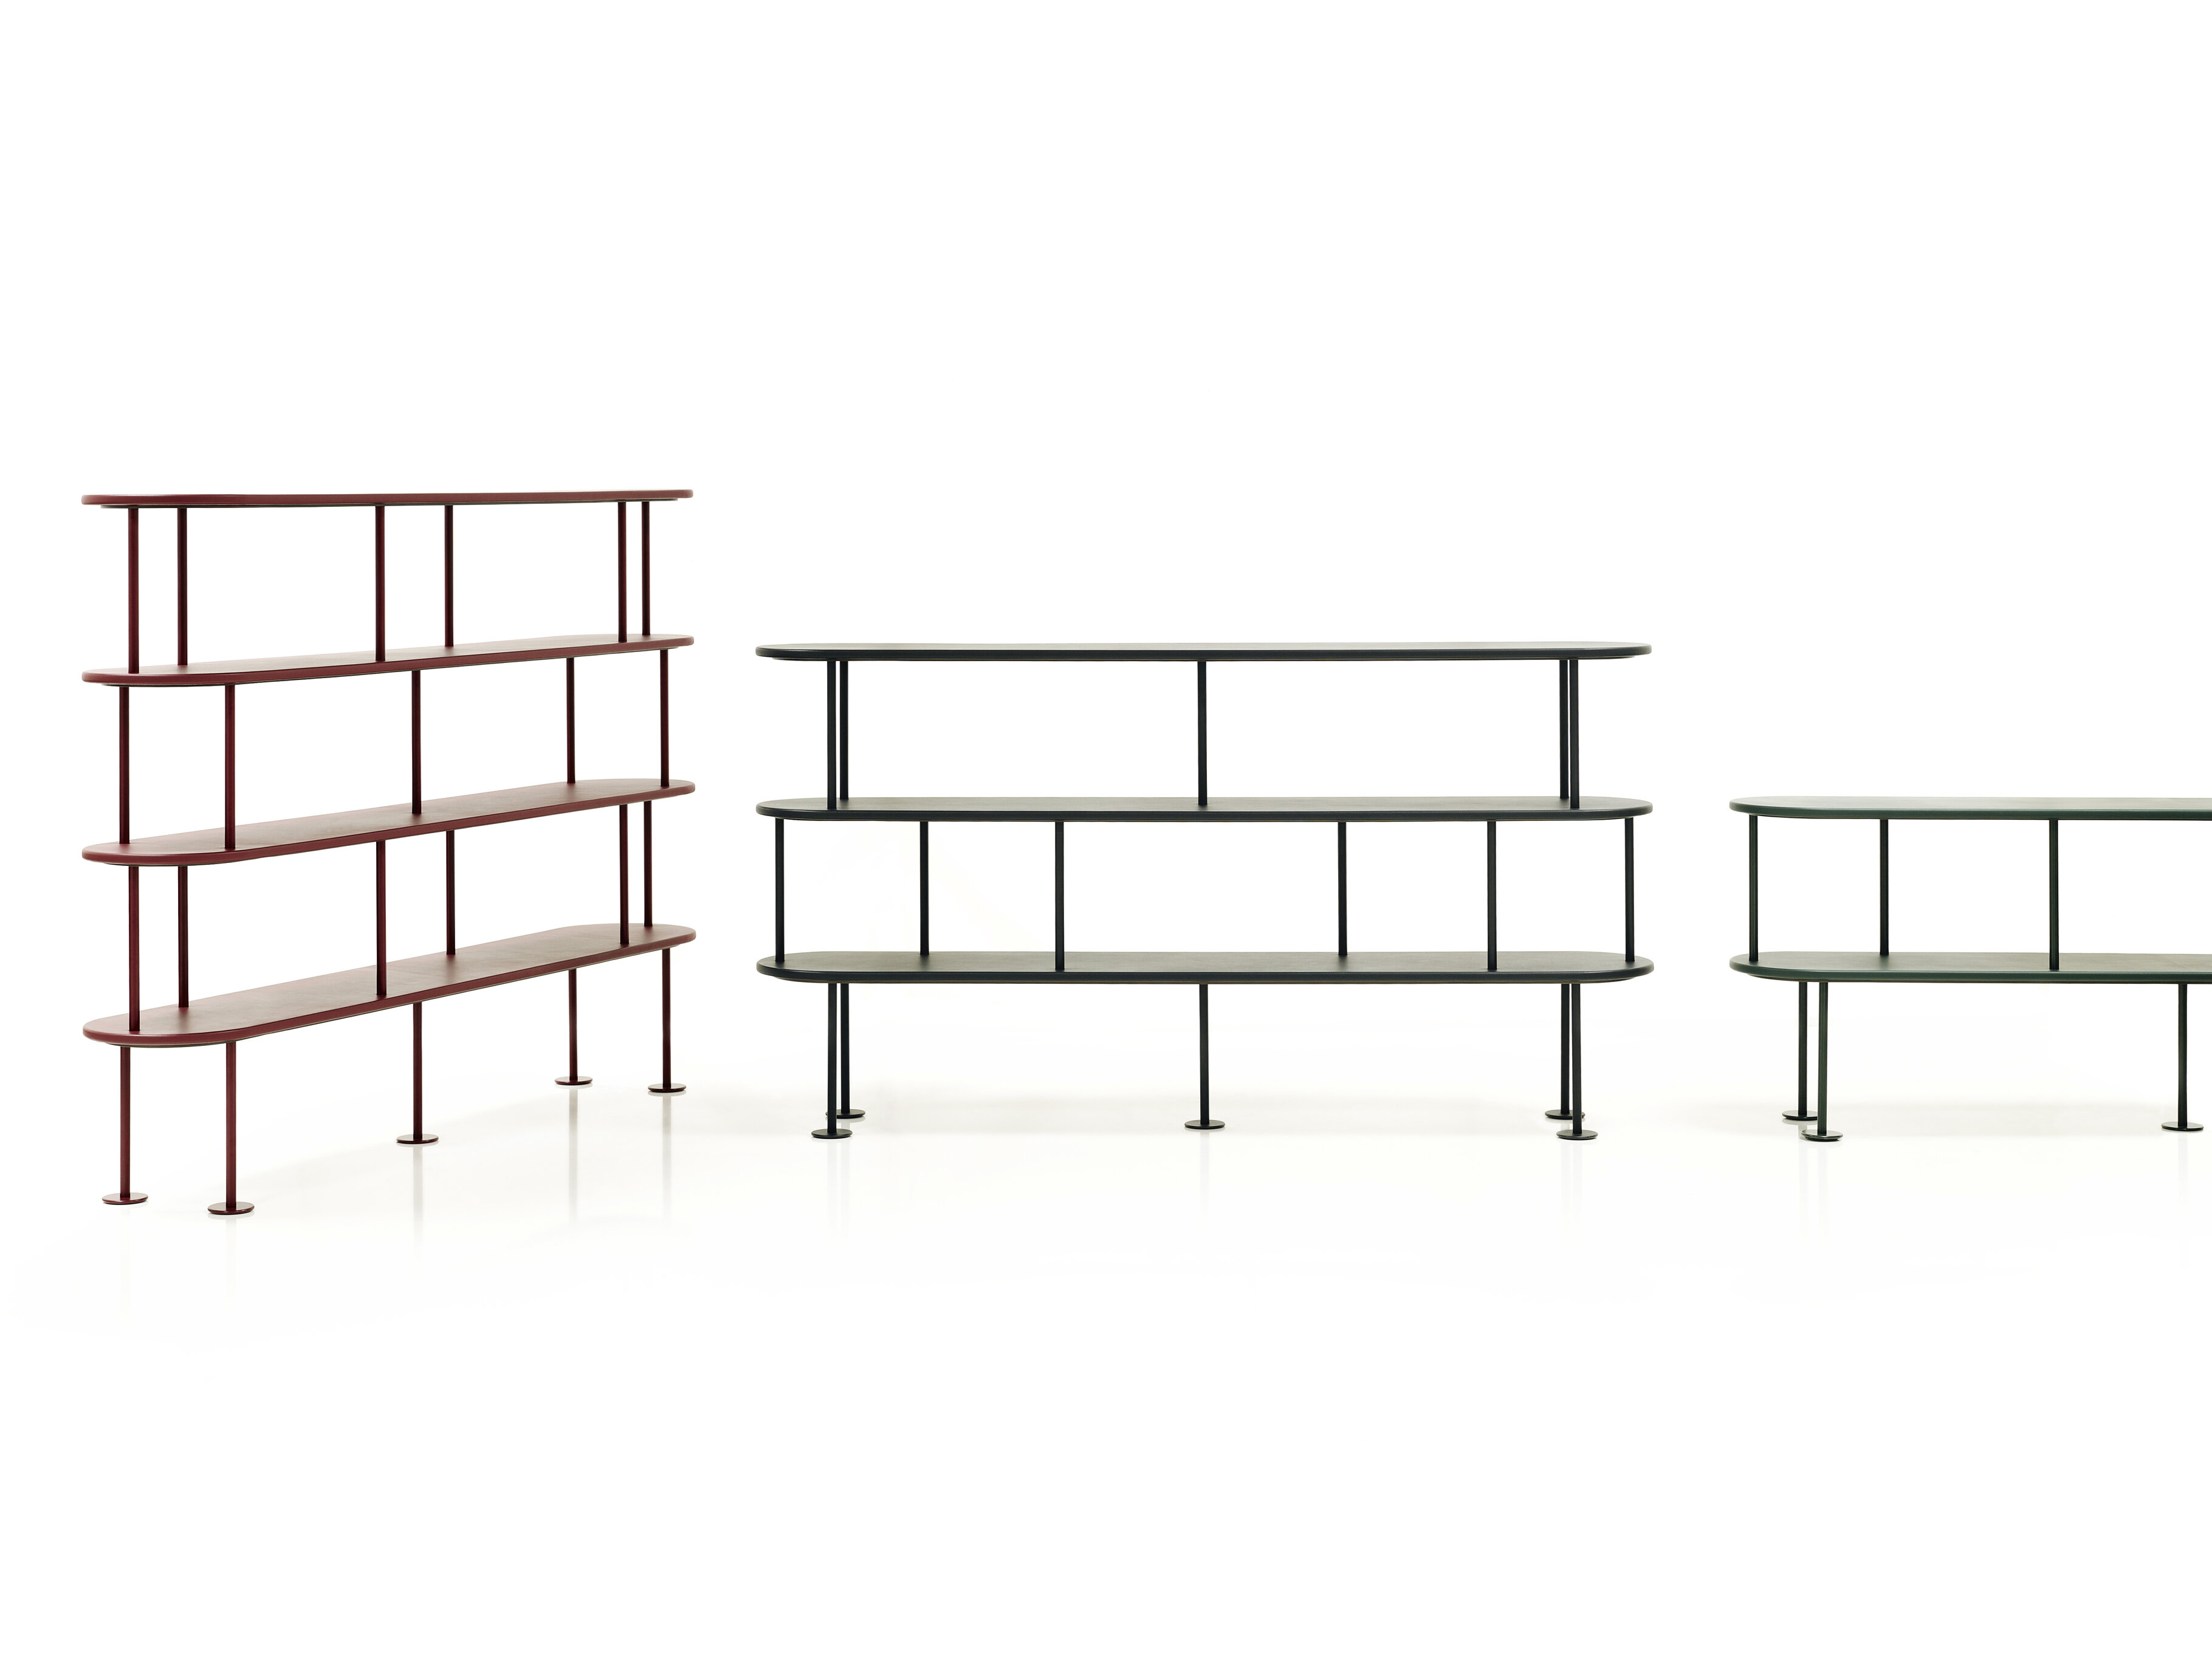 MD Shelf group 70, 105 and 140cm height, shelves in leather nappa dark red, nappa black, nappa verde